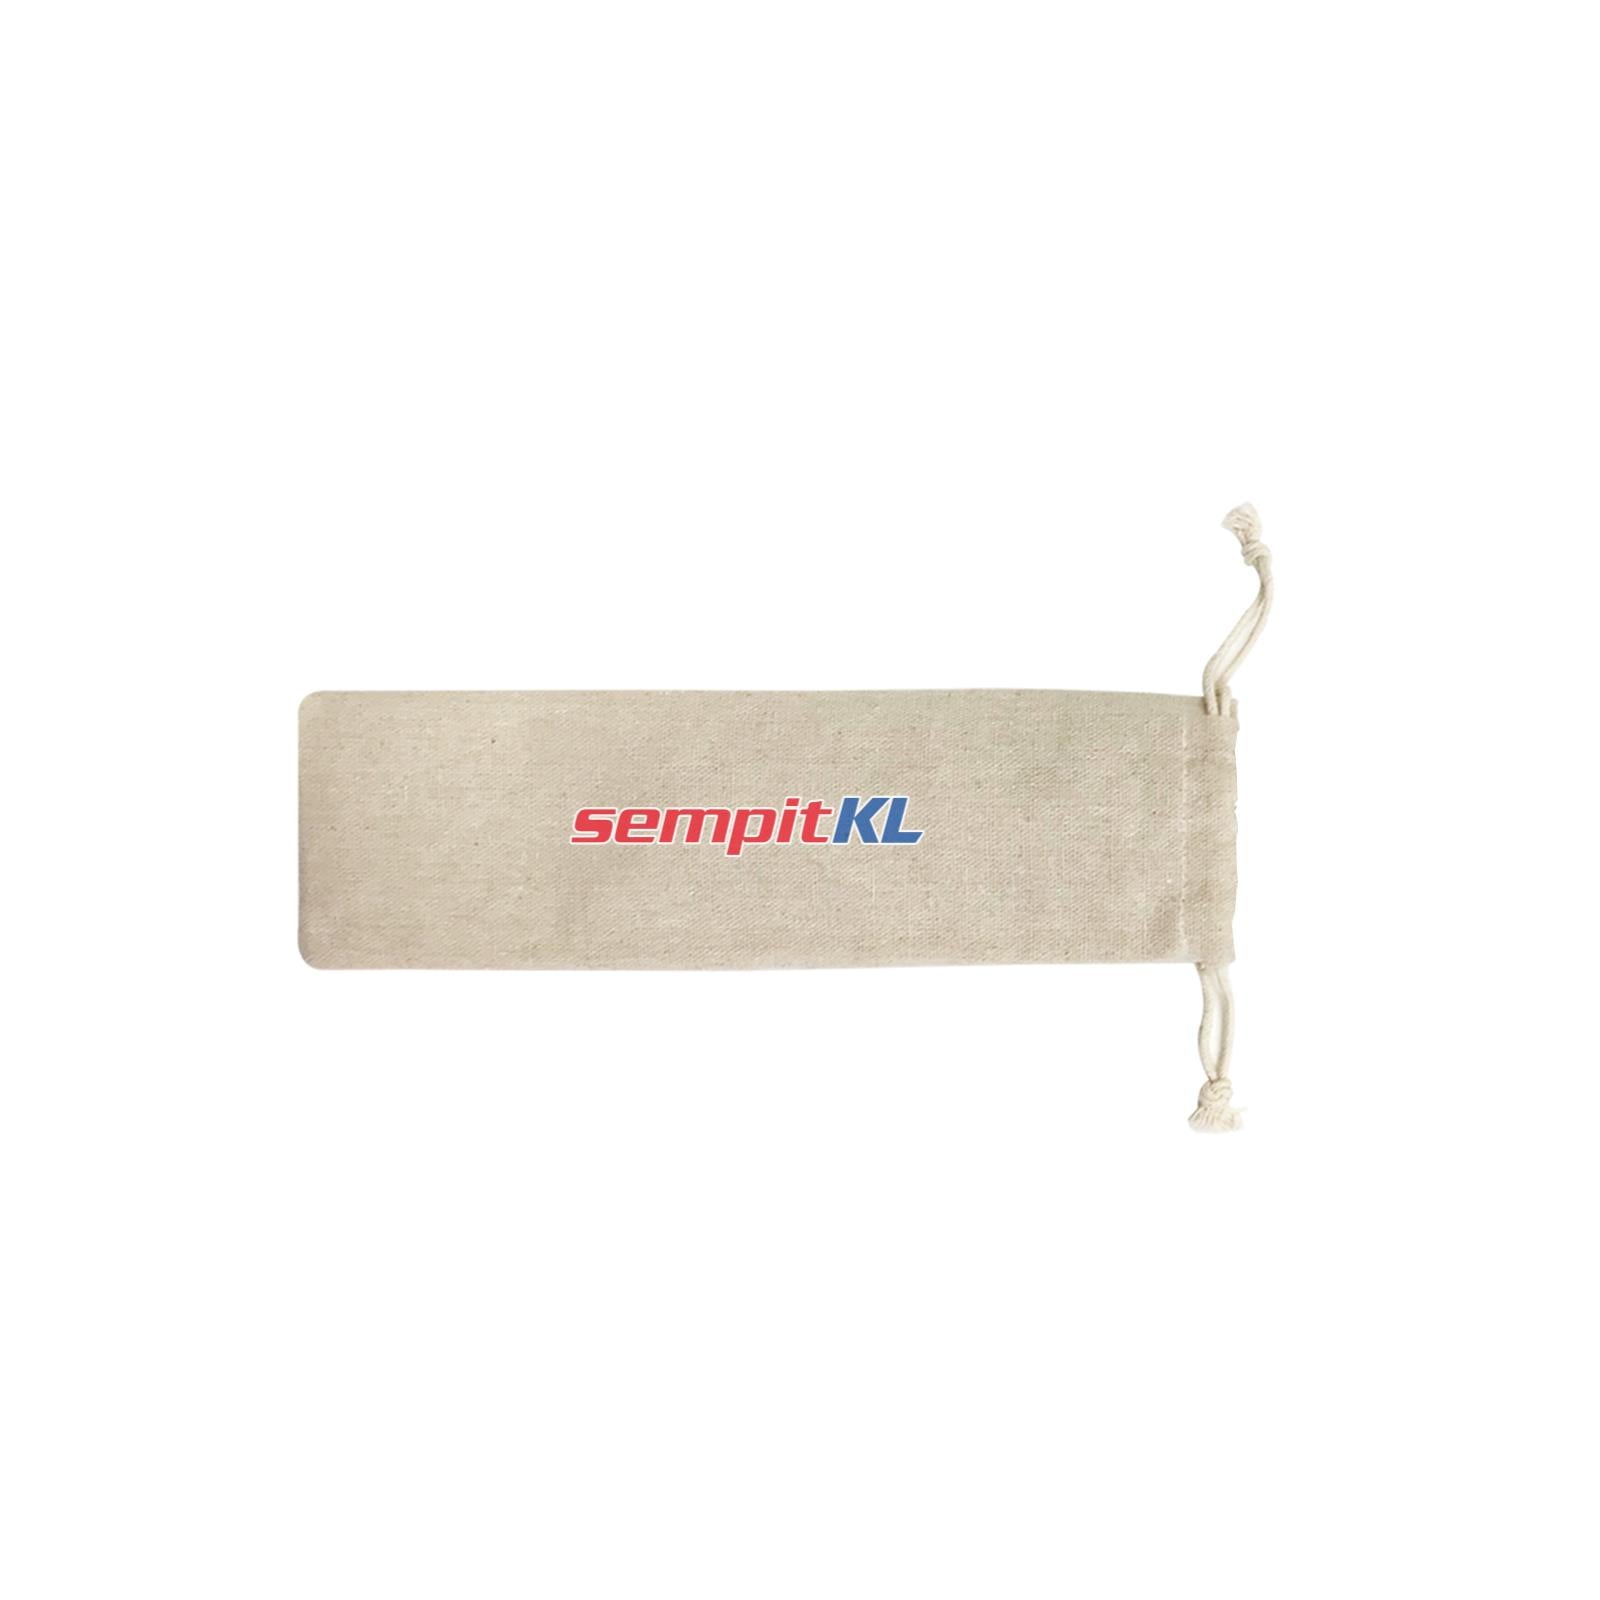 Slang Statement Sempitkl SB Straw Pouch (No Straws included)